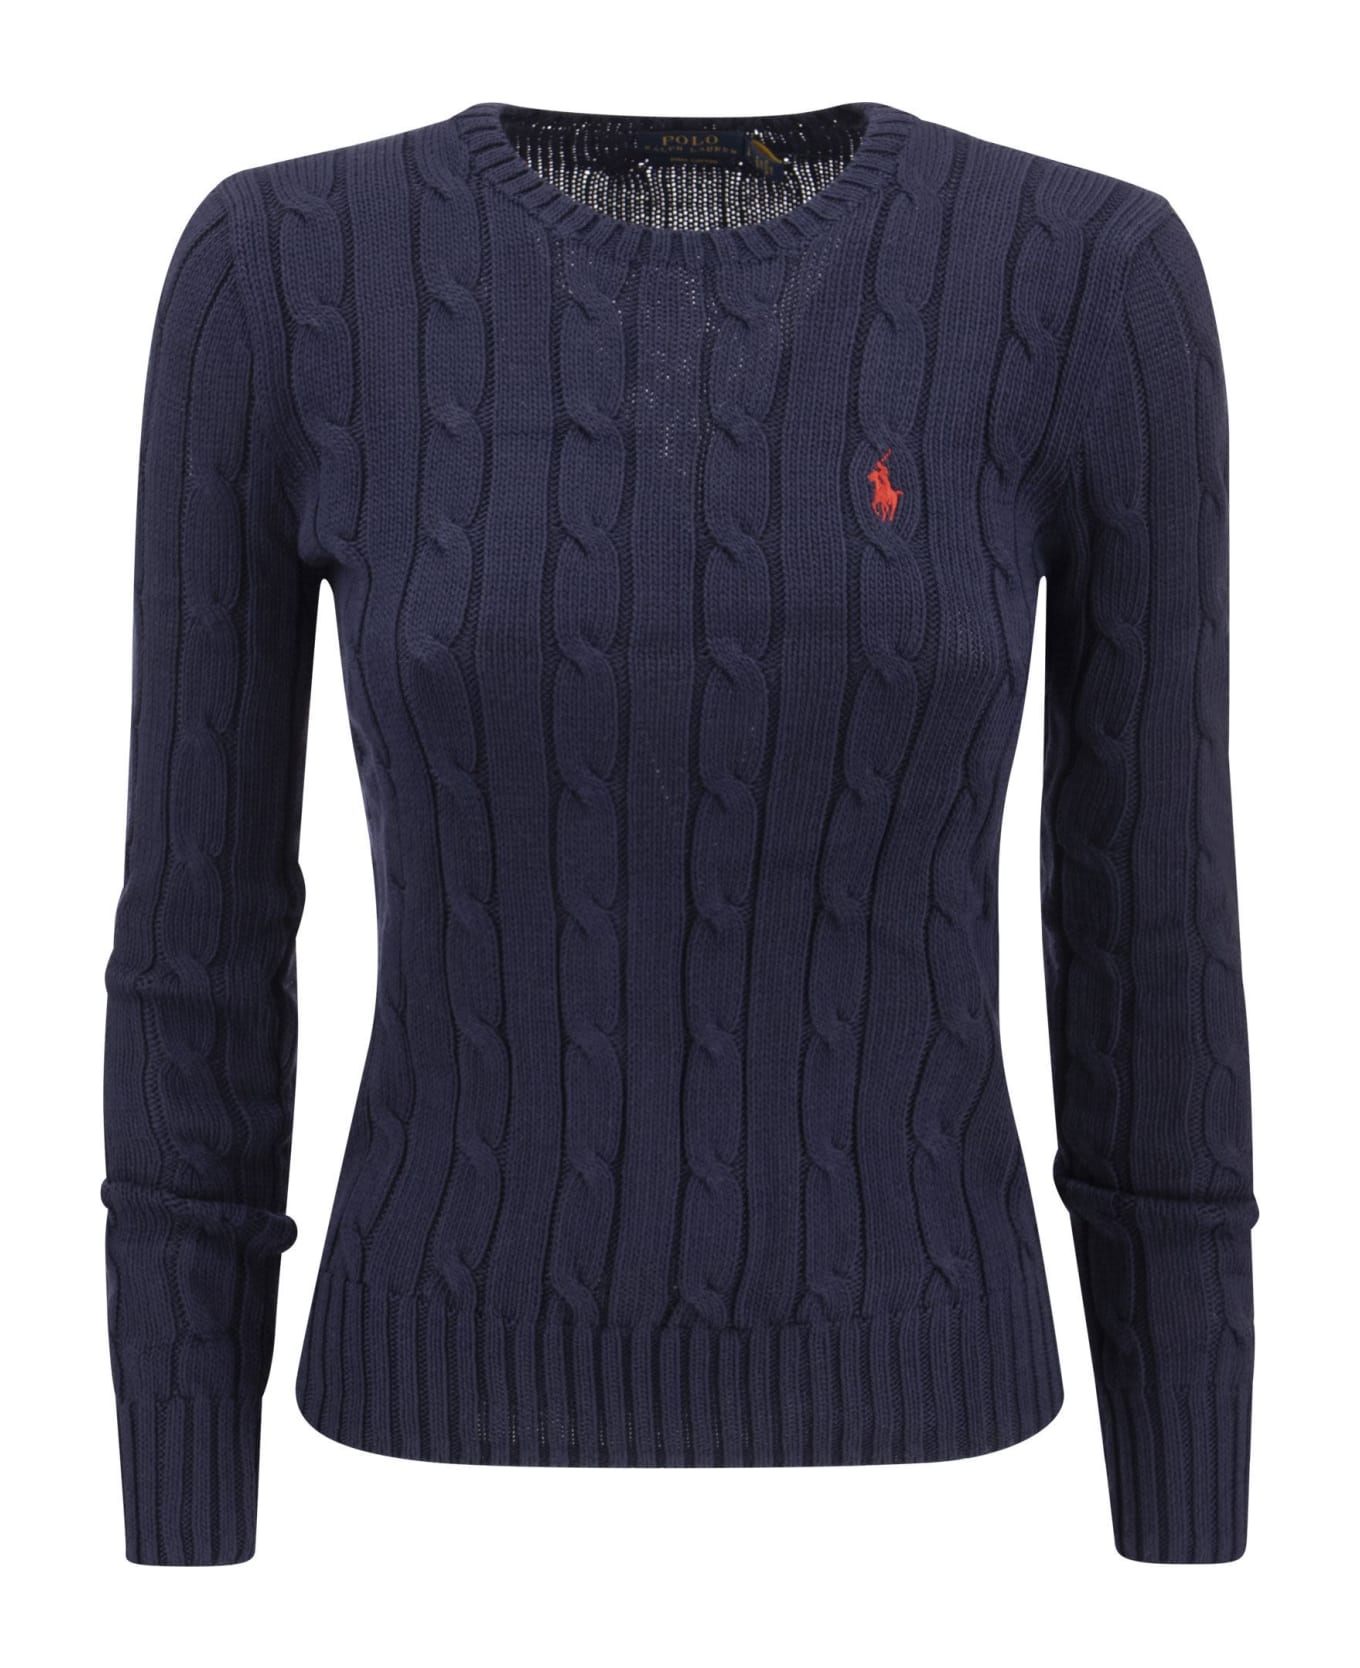 Polo Ralph Lauren Cable Knit Pullover With Contrasting Embroidered Logo - Navy Blue